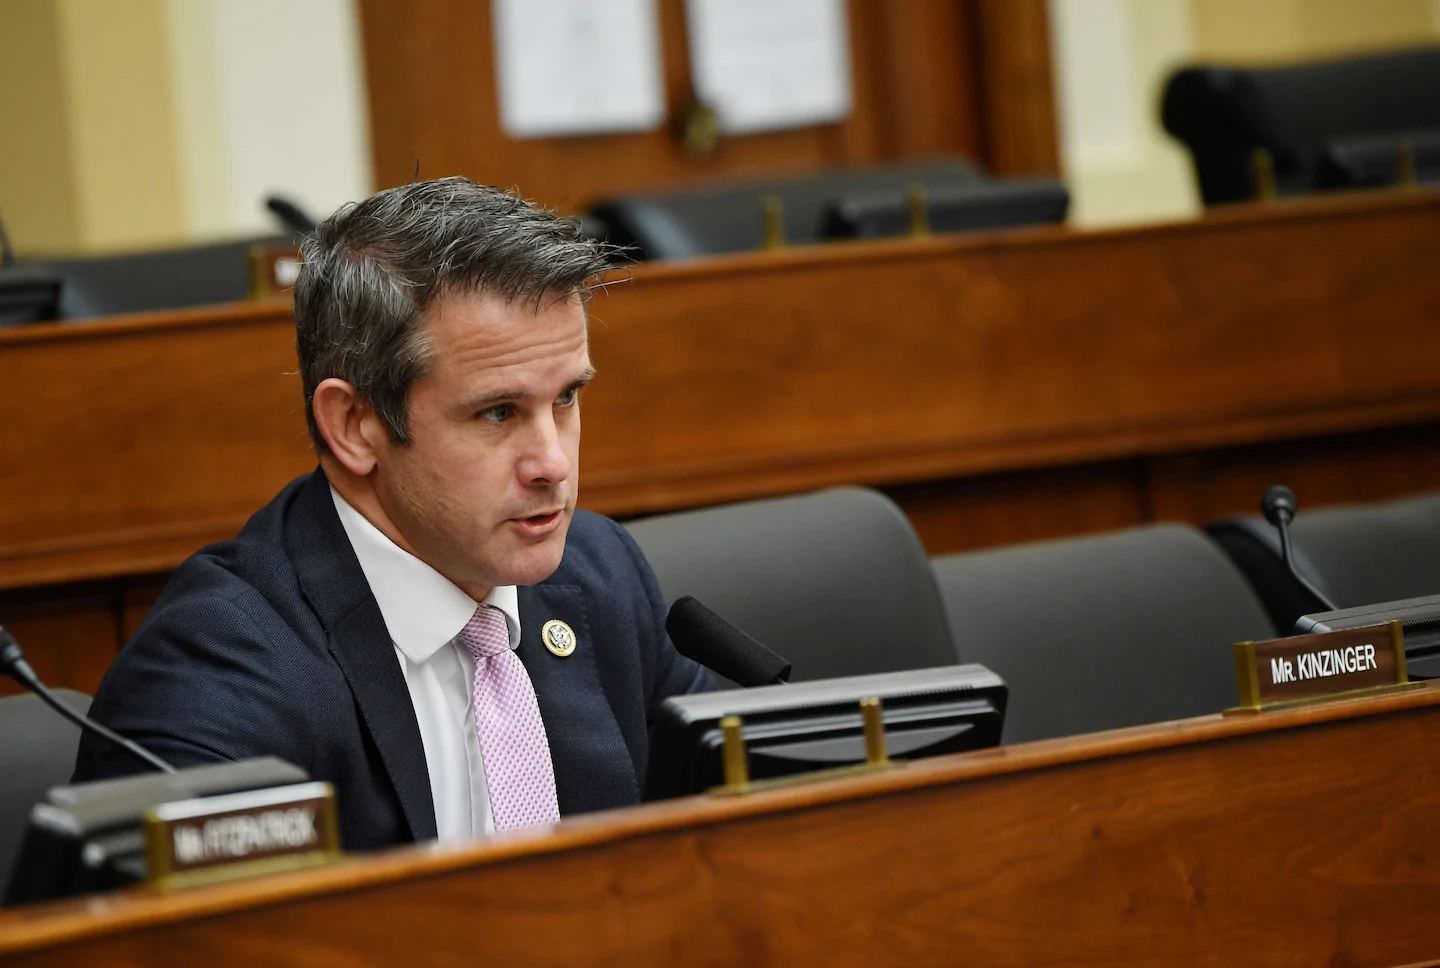  GOP Rep. Kinzinger to start new PAC to challenge party’s embrace of Trump